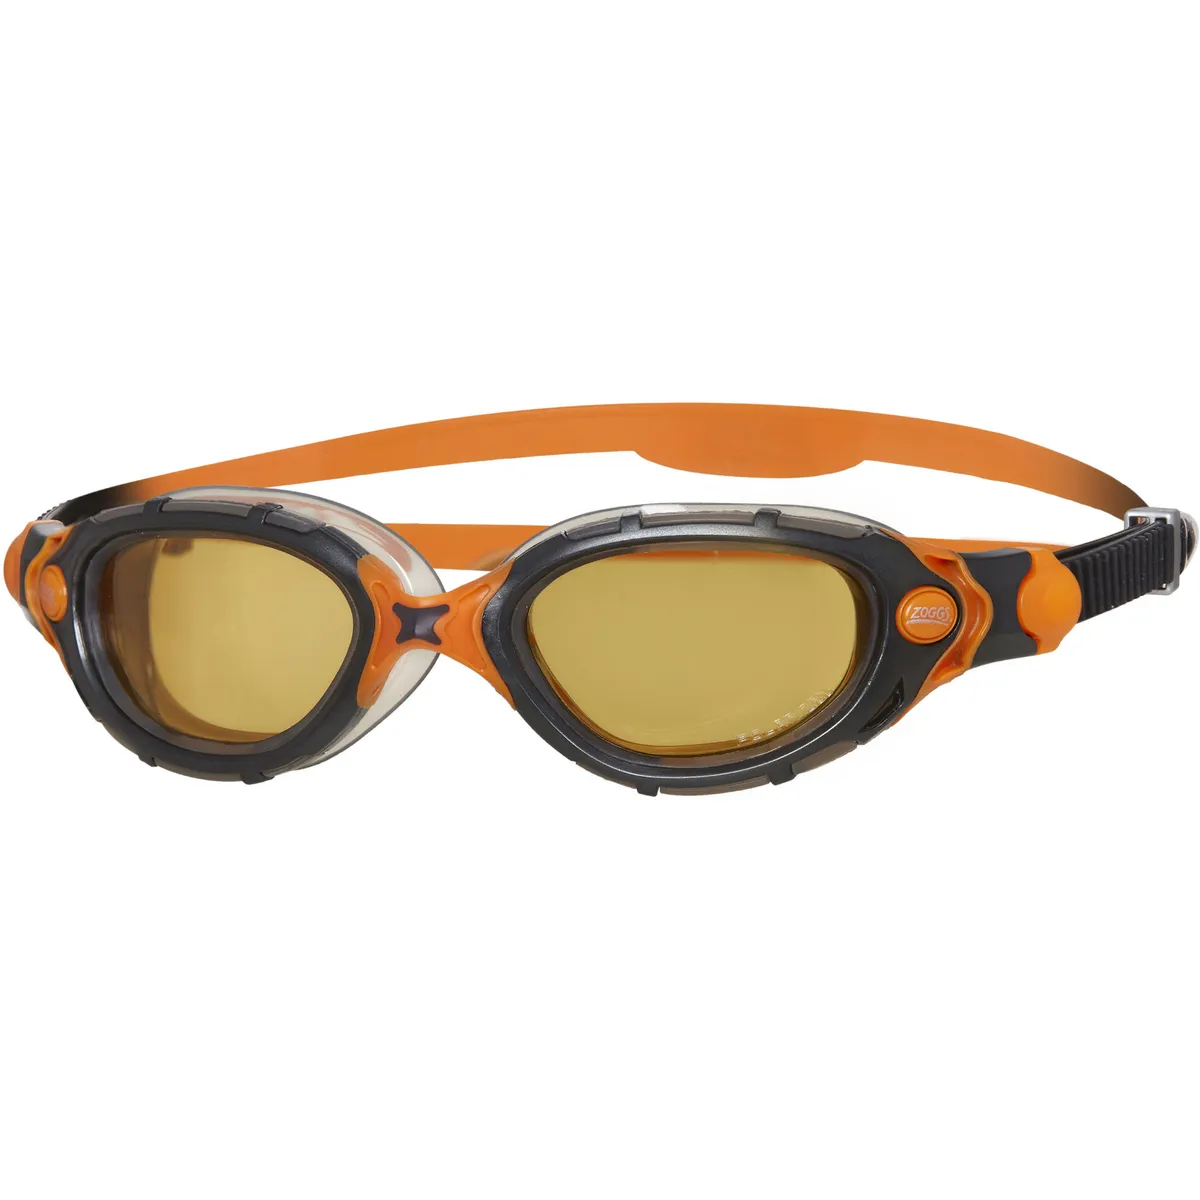 Swimming goggles on a white background.